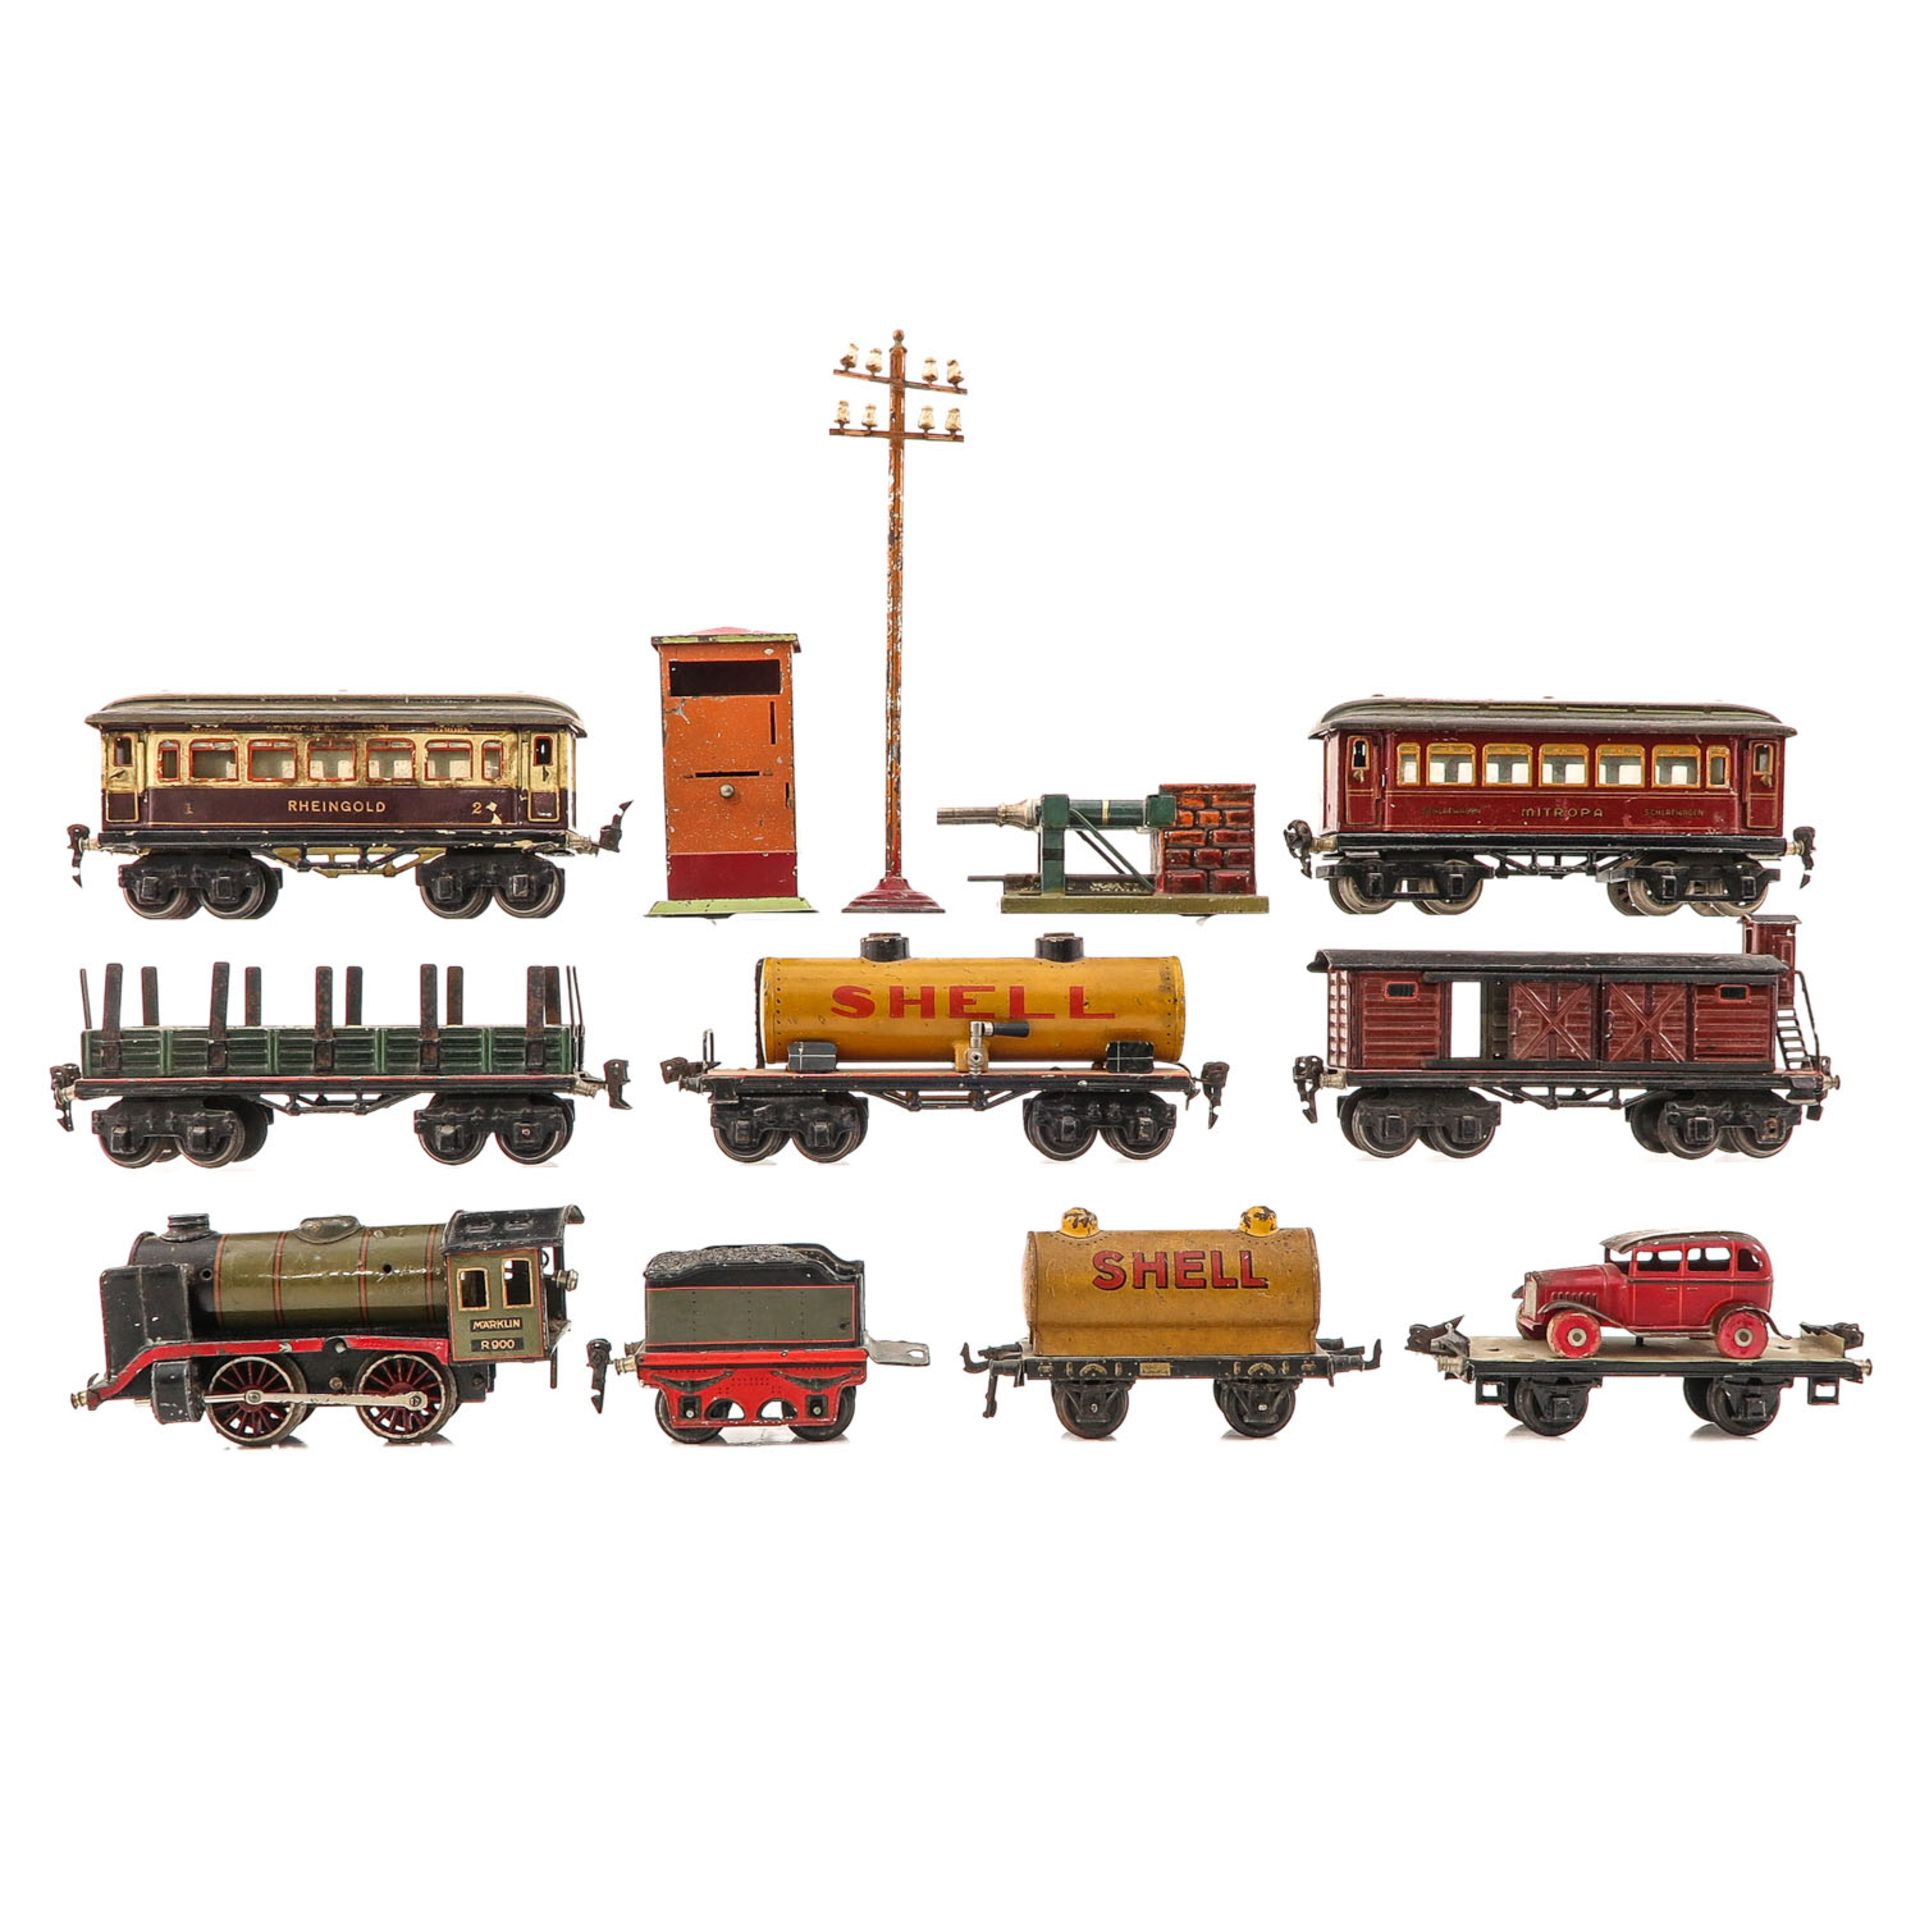 A Collection of Marklin Trains and Accessories - Image 2 of 10